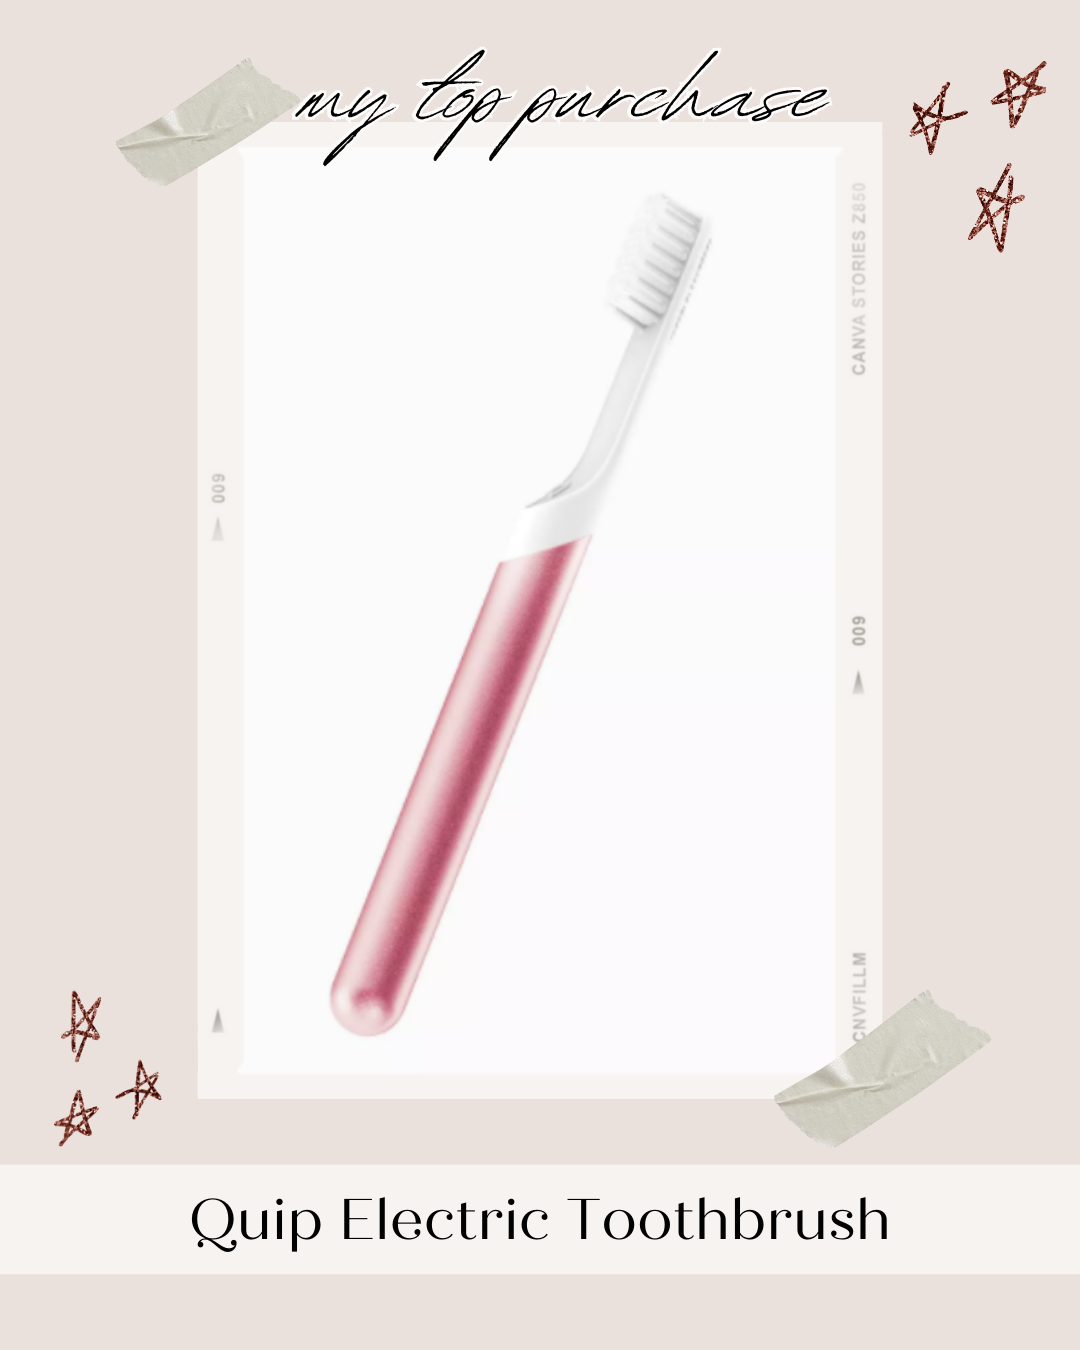 Quip Metal Electric Toothbrush - Affordable by Amanda